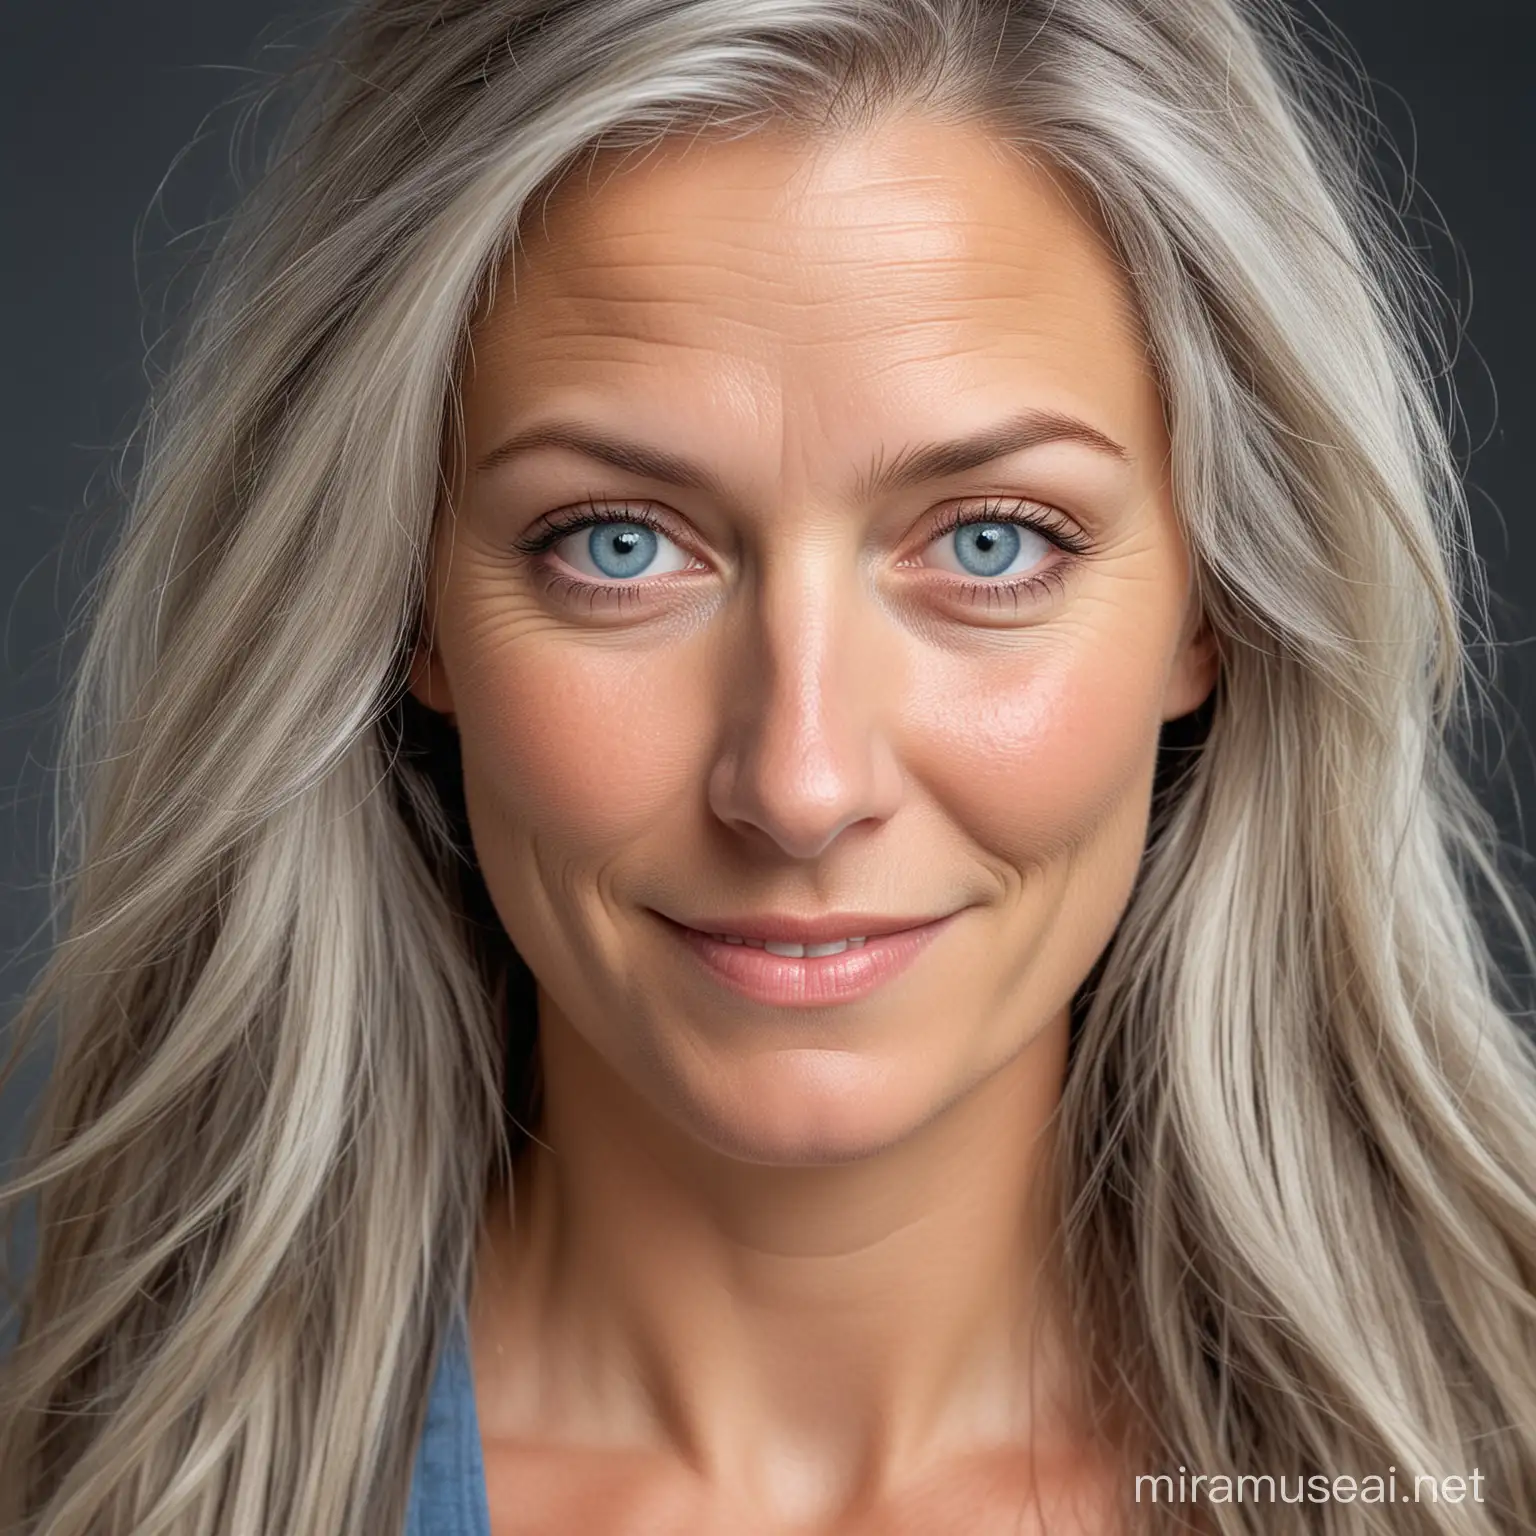 Cheeky Grinning 44YearOld Woman with Blue Eyes and Gray Hair